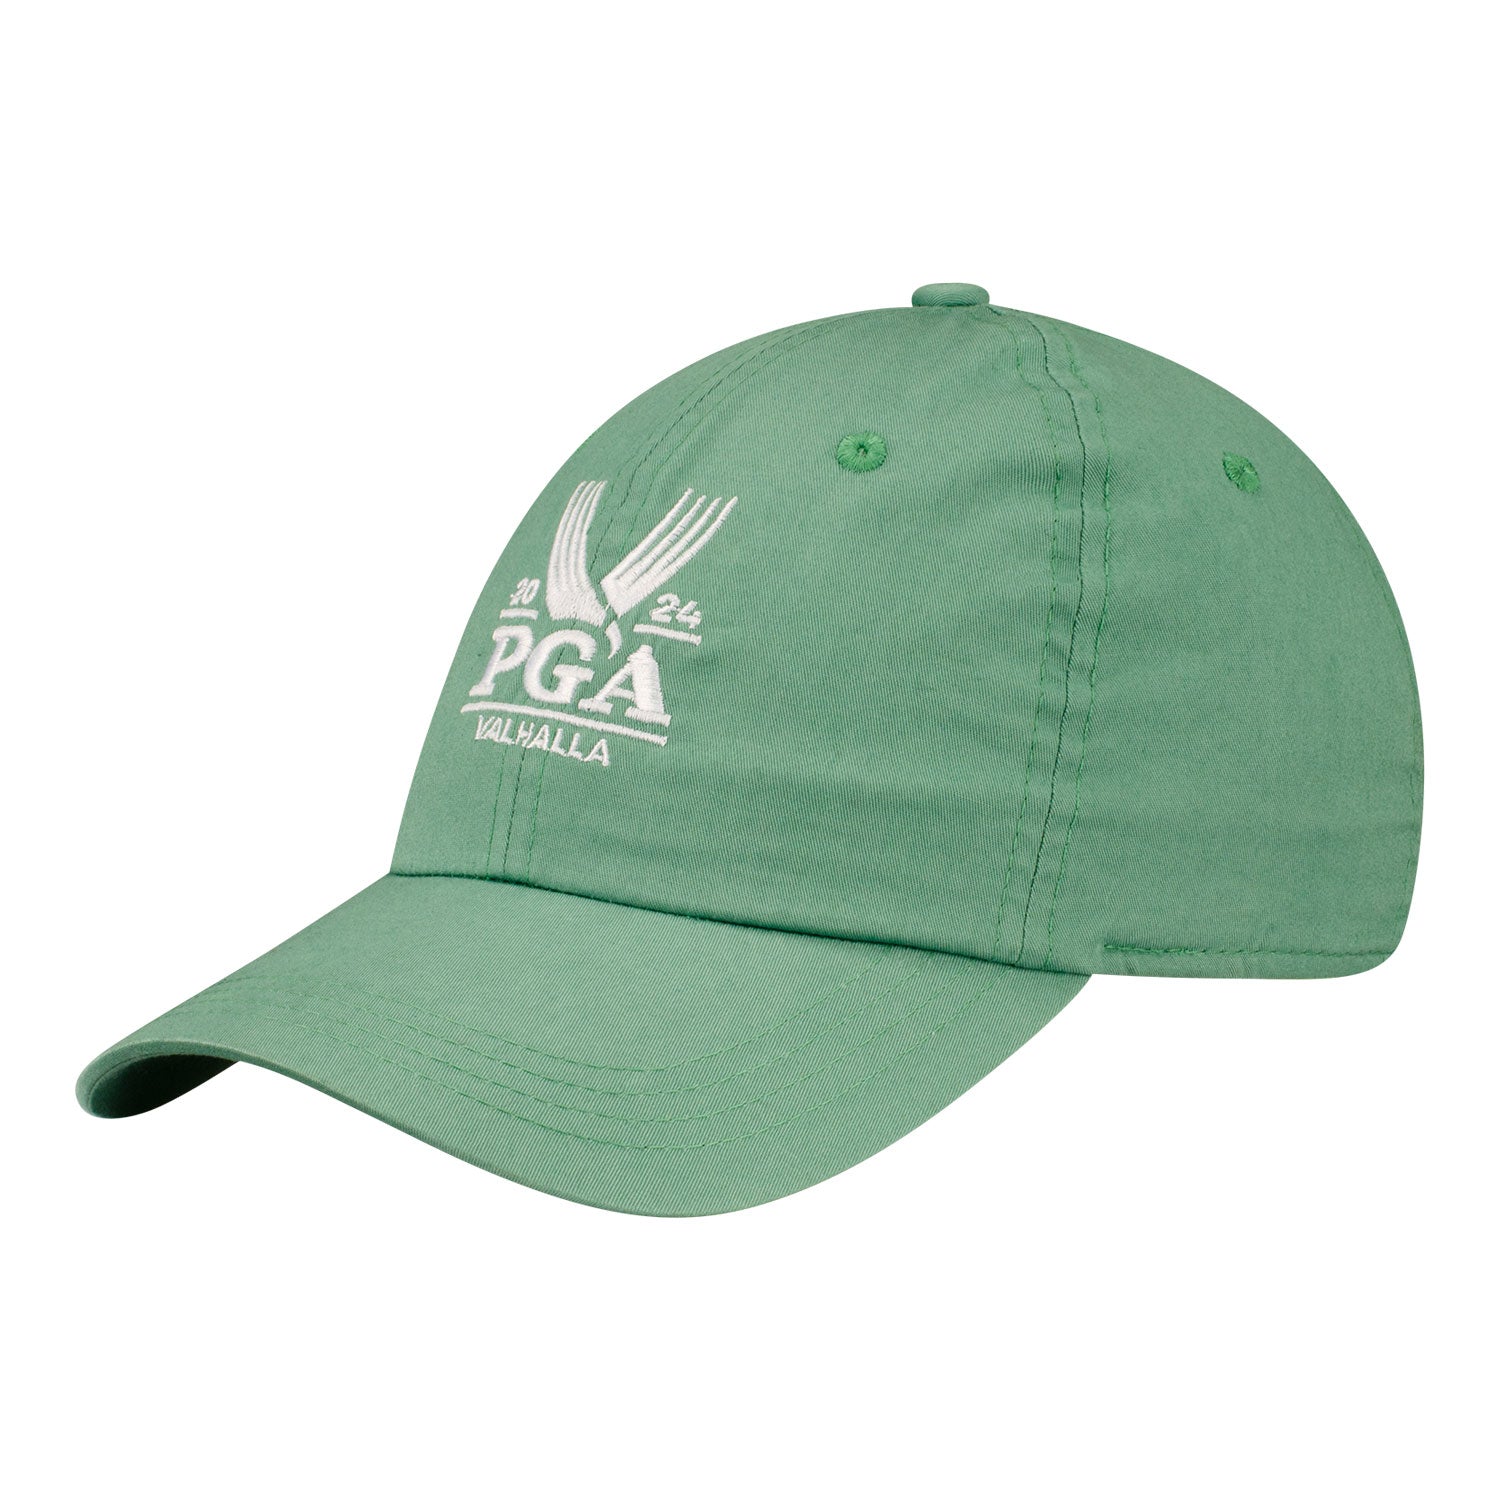 Ahead 2024 PGA Championship Shawmut Unstructured Cotton Hat in Seagrass - Angled Front Right View